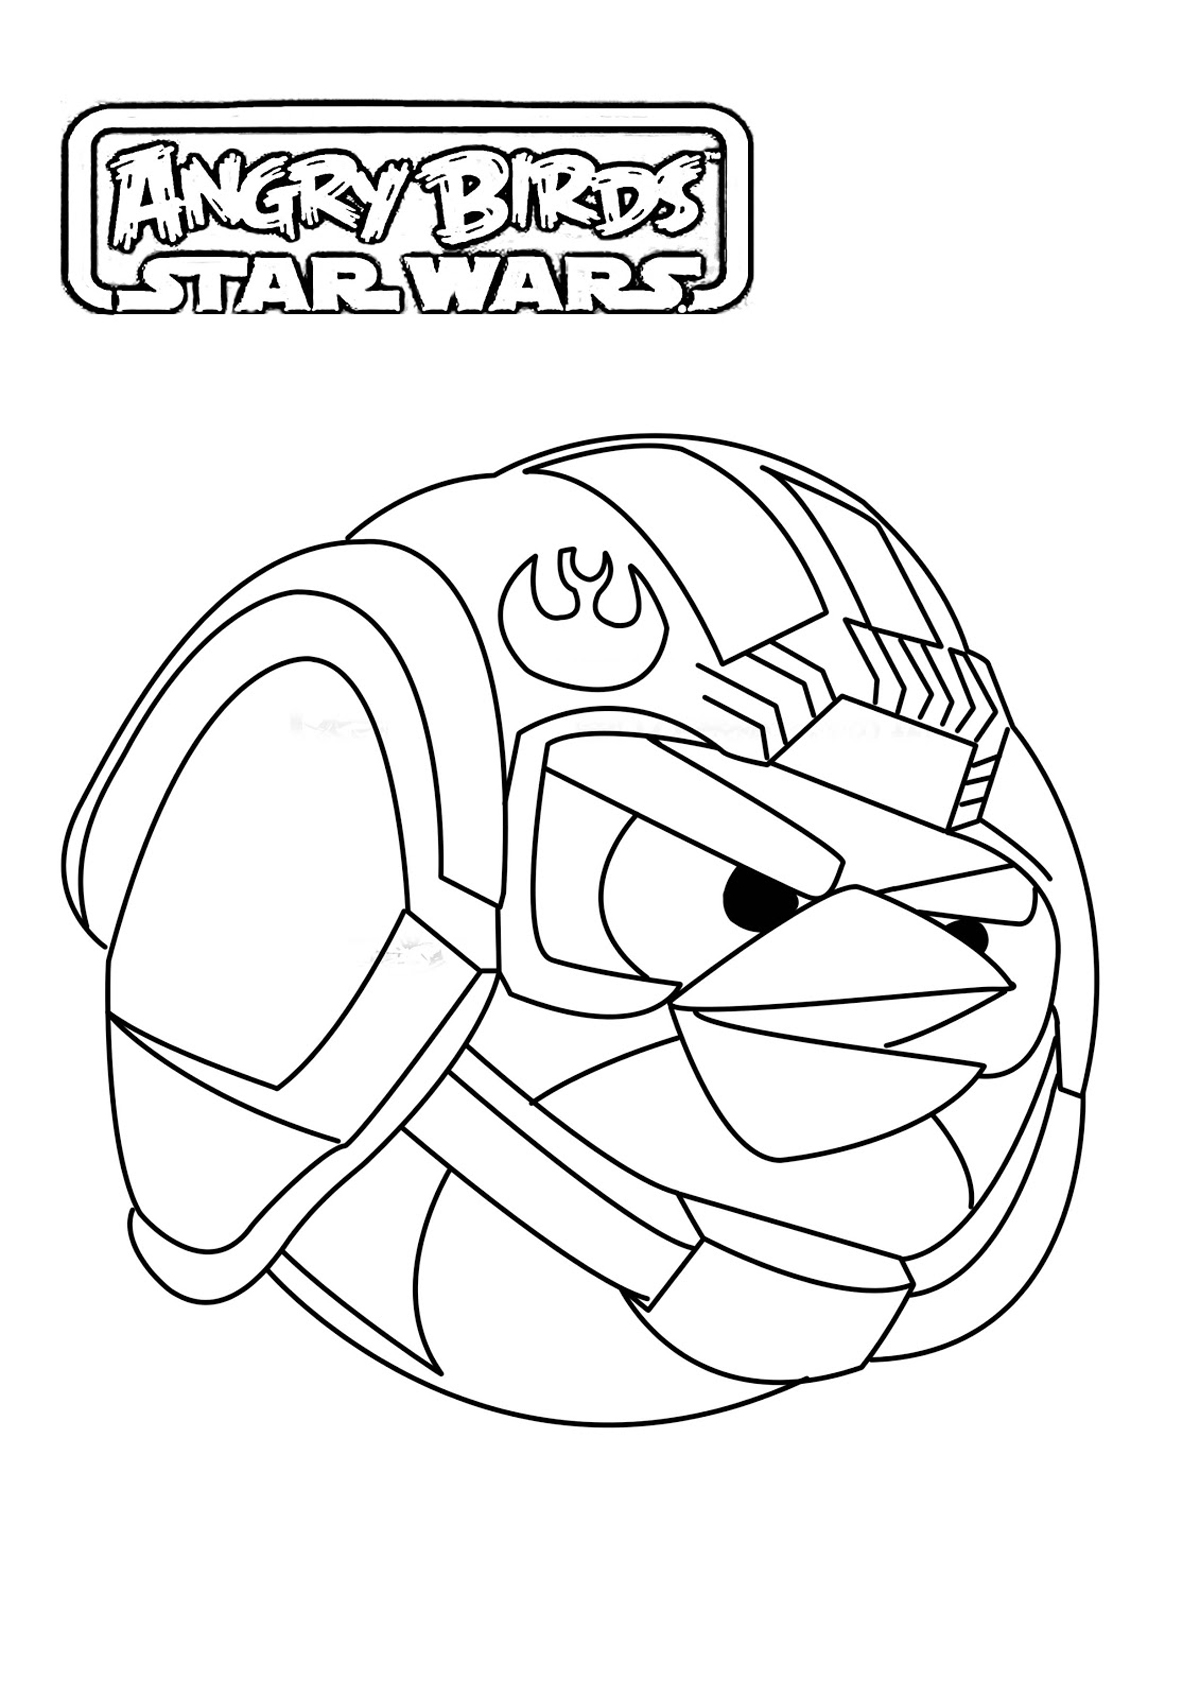 Angry Birds Star Wars To Download For Free Angry Birds Star Wars Kids Coloring Pages